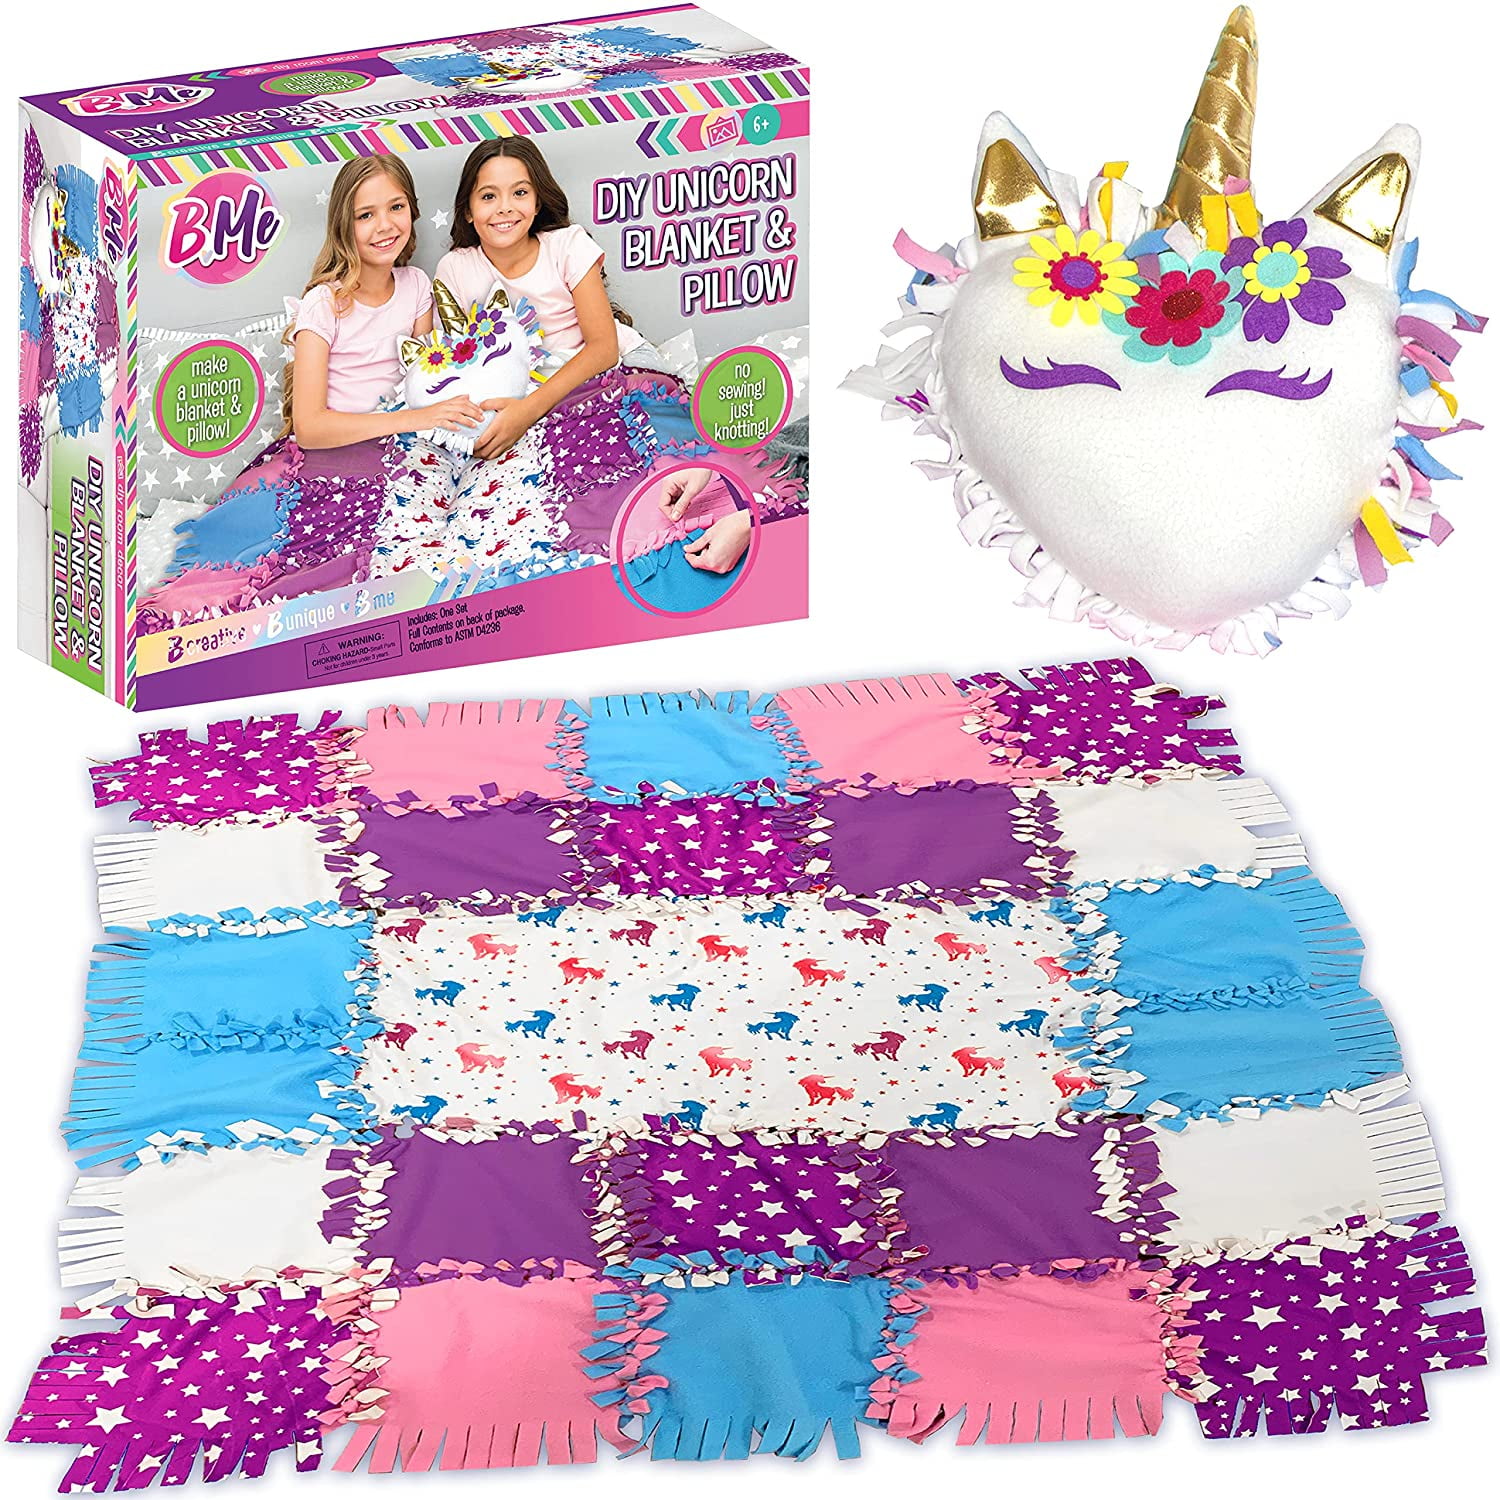 Zelda's First Sewing Creations and Kid Sewing Kit Ideas -  